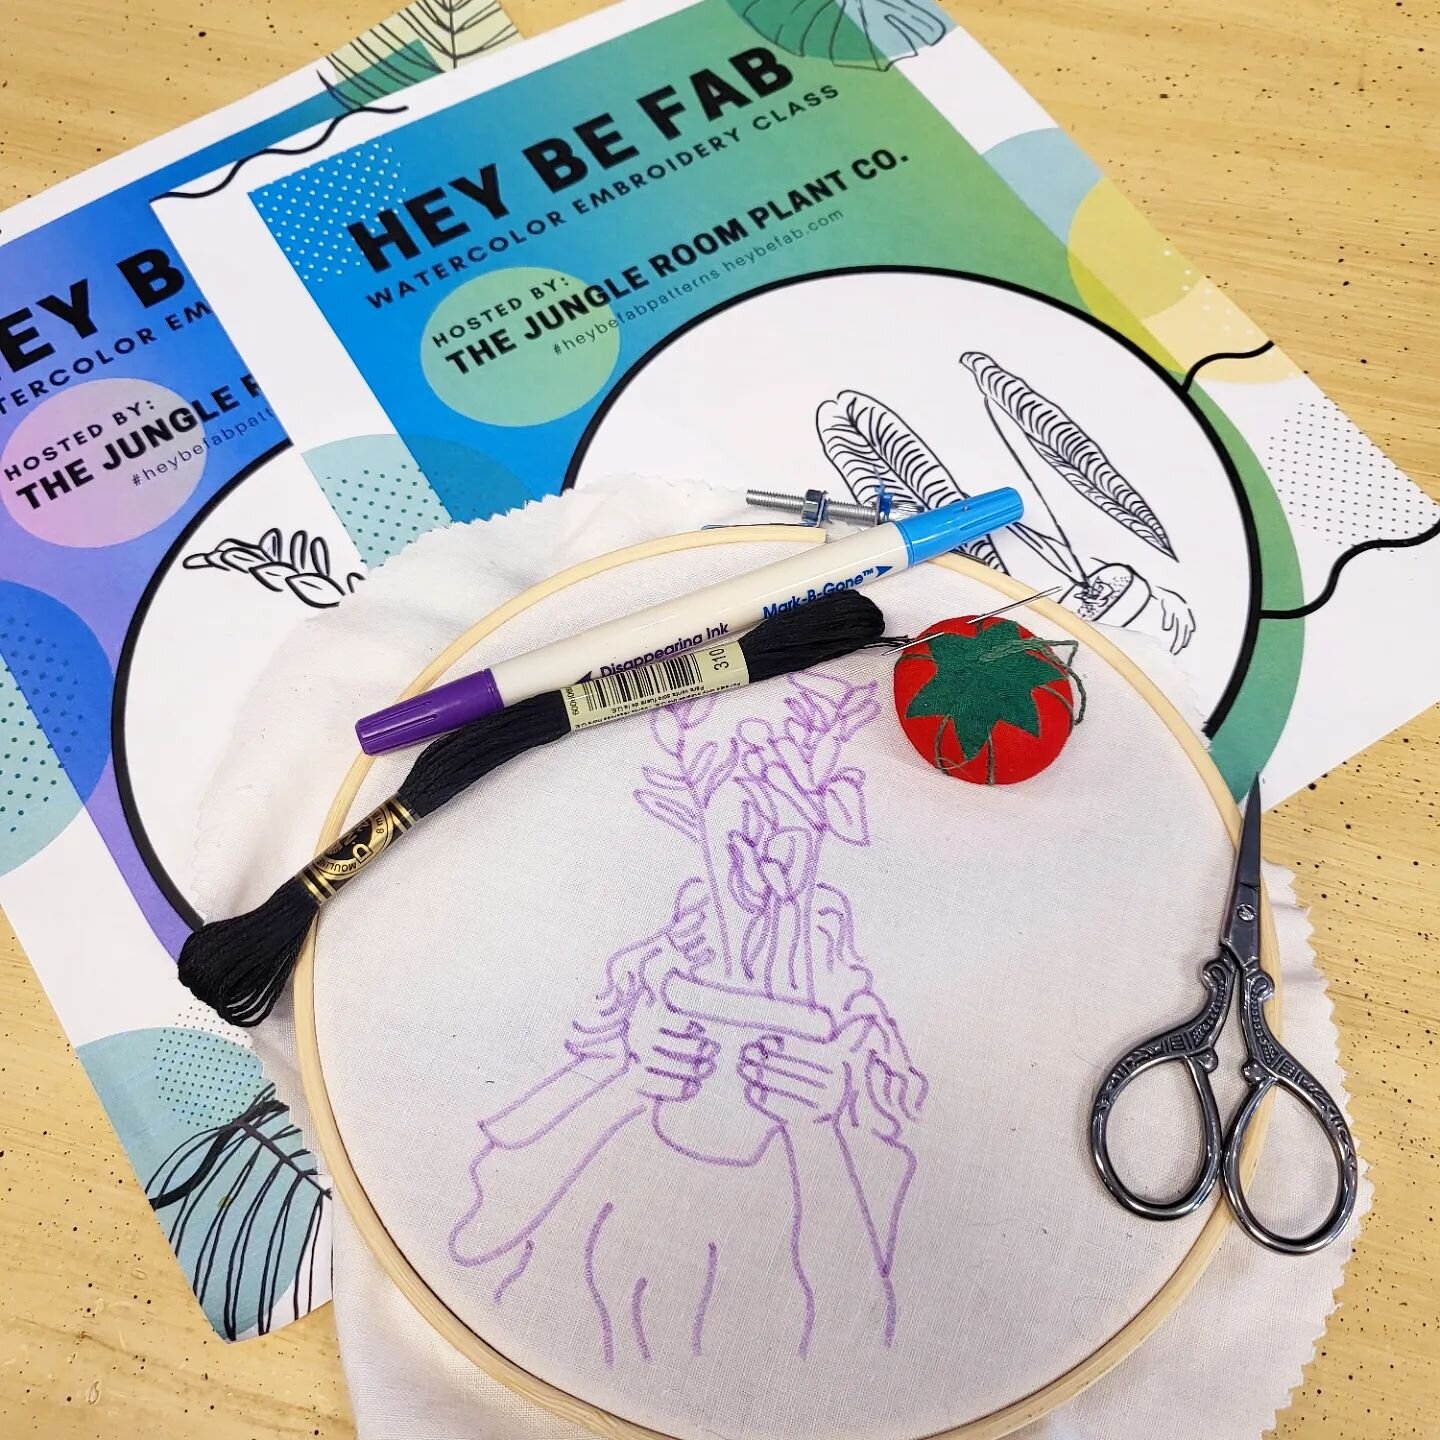 Just finished our incredible Threaded Conversations class with @heybefab.

Audrey taught basics in embroidery along with how she watercolors her art work.

We had a great time talking and getting to know each other. 

None of us finished our stitches